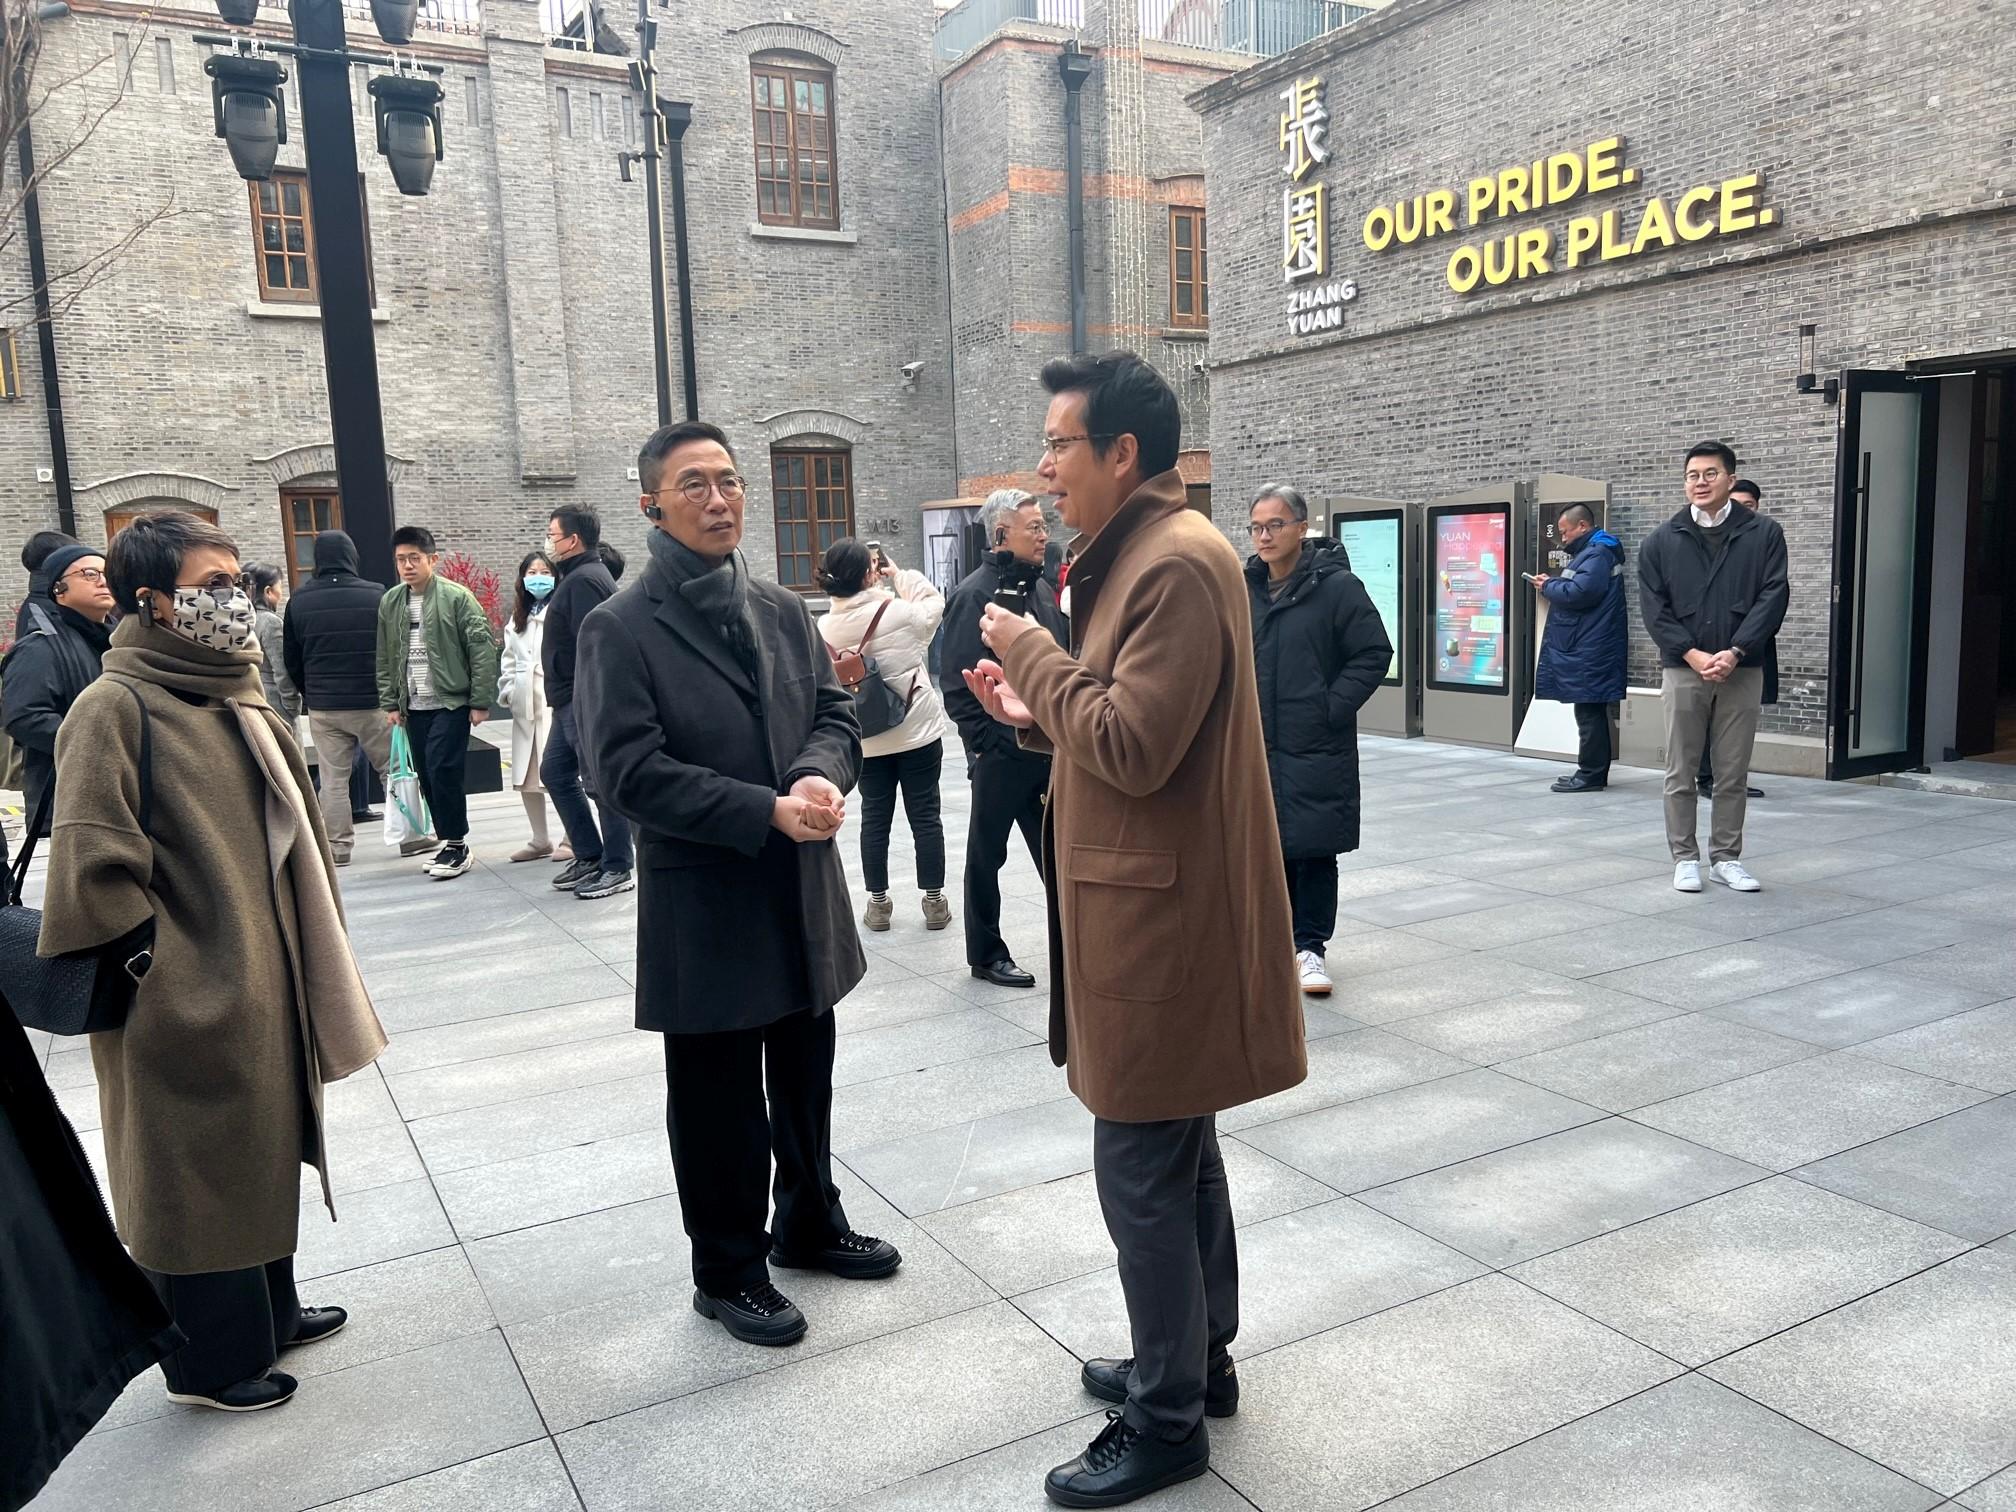 The Secretary for Culture, Sports and Tourism, Mr Kevin Yeung (second left), visited Zhangyuan in Shanghai yesterday (January 7) to learn about how revitalisation and incorporation of commercial elements could bring vibrancy to urban projects.